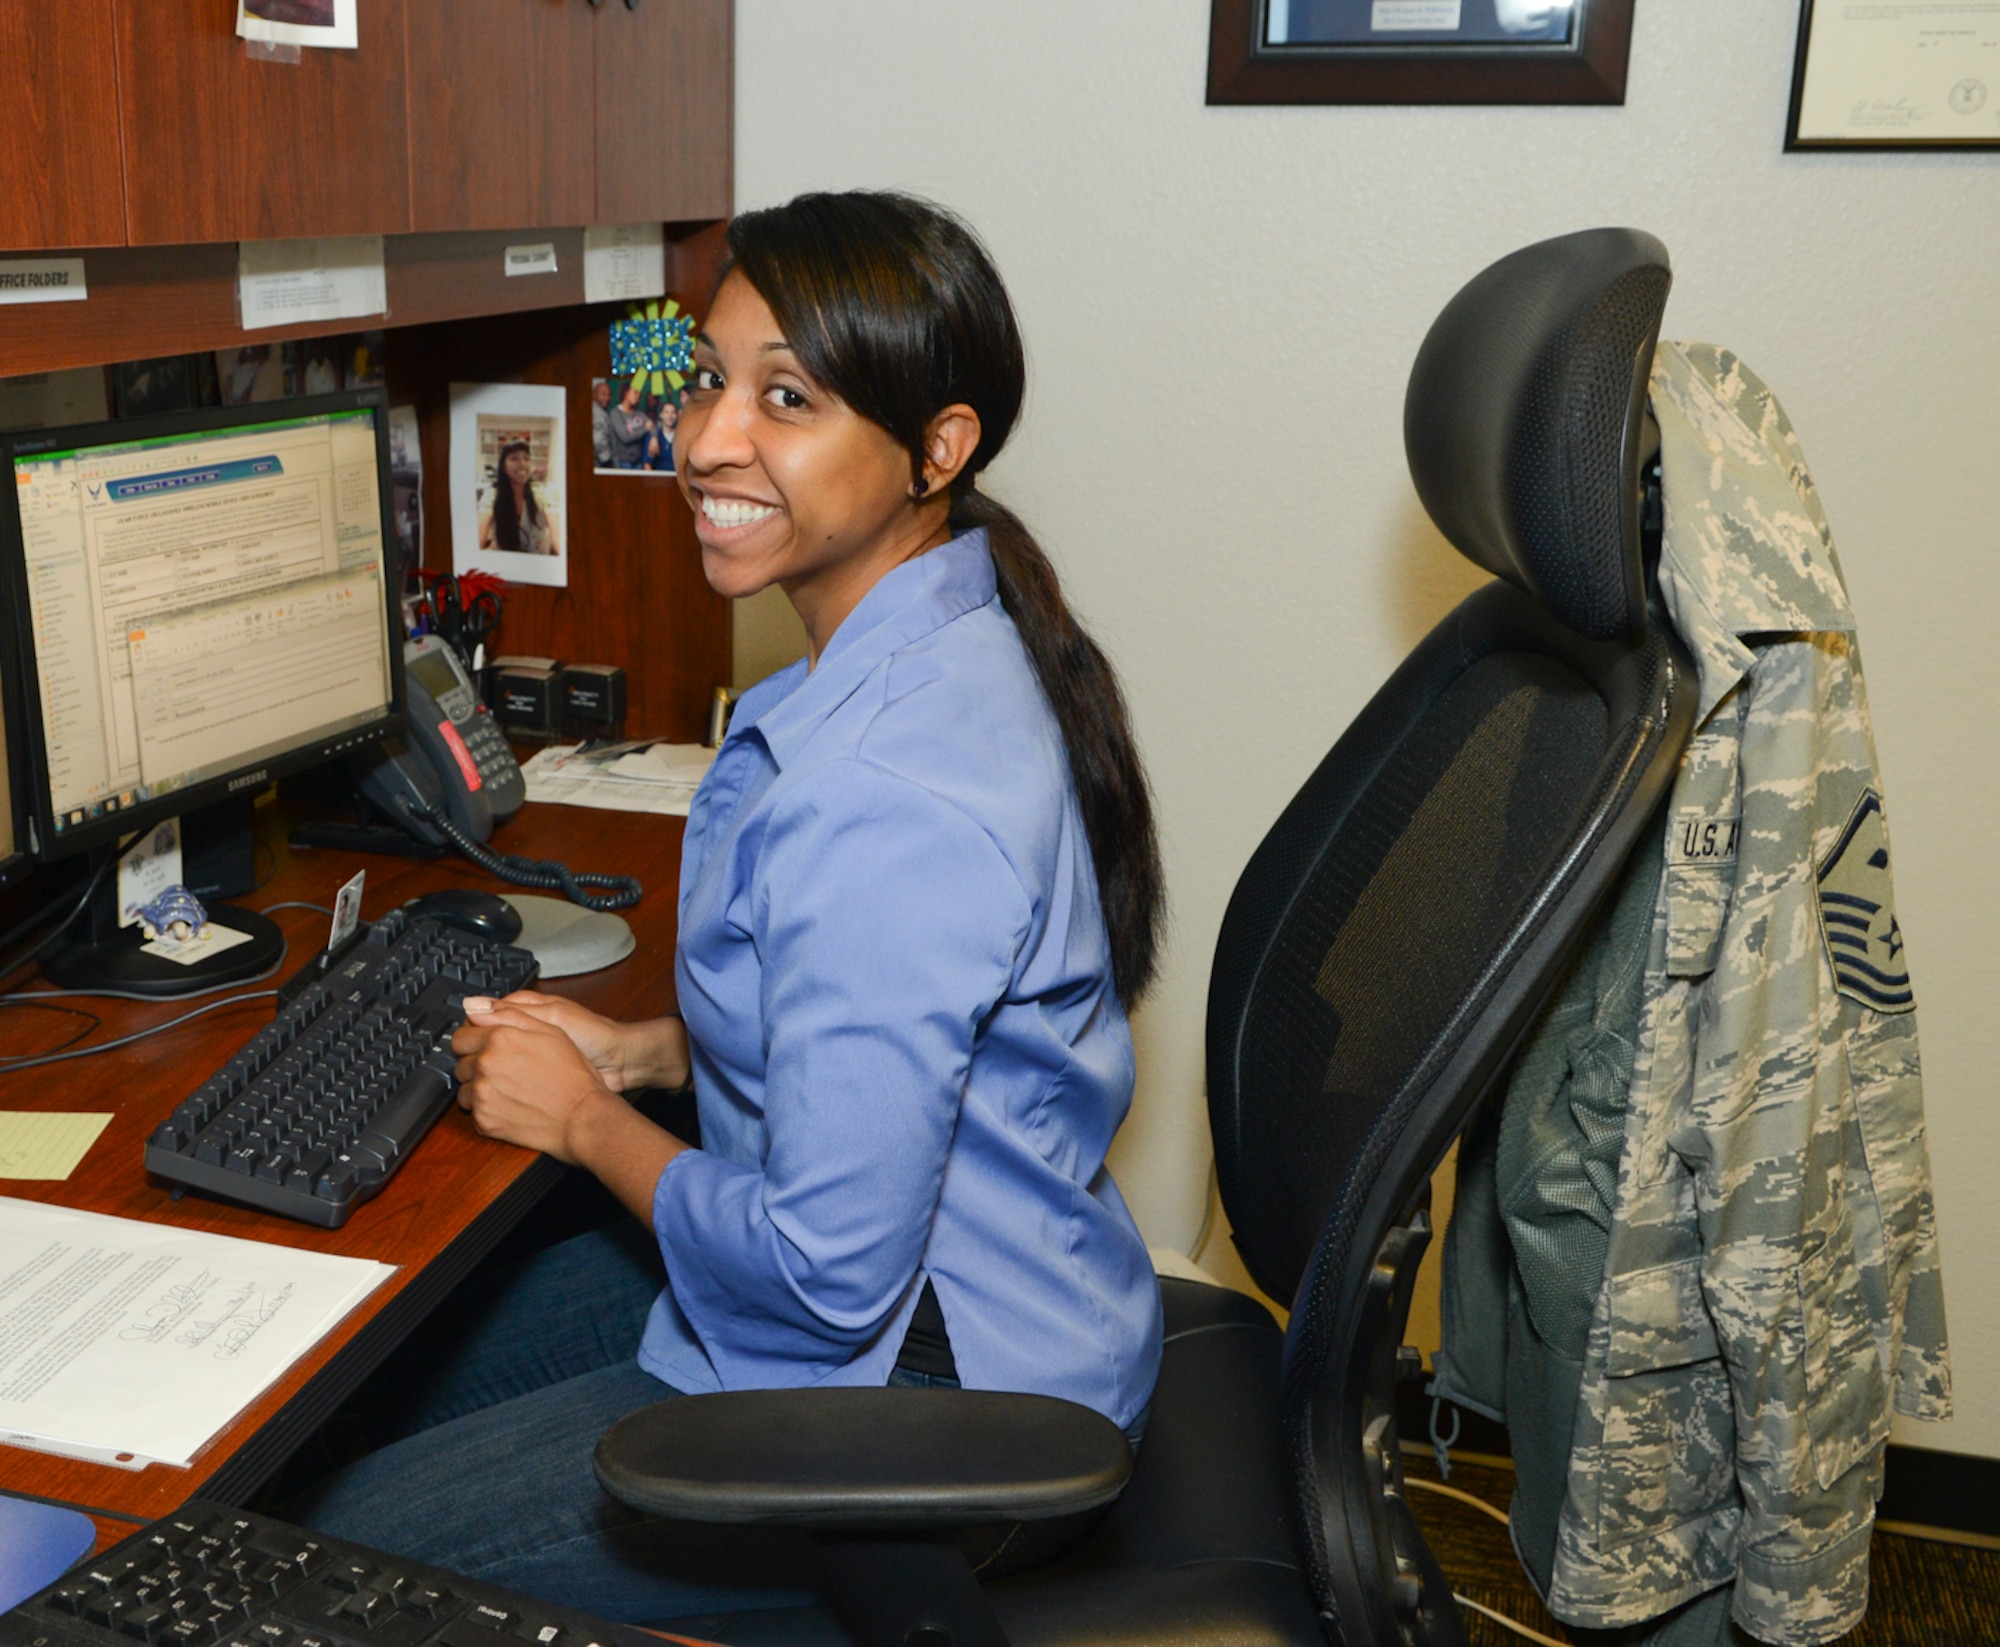 Master Sgt. Olypia Williamson, 1st Sgt.,136th Airlift Wing, works on her computer while wearing jeans in observance of 'Denim Day', a campaign observed annually on April 23 for the awareness of sexual assault prevention and response  at Naval Air Station Fort Worth Joint Reserve Base, Texas, April 23, 2014. This occasion marks the last event of the Sexual Assault Awareness Month in the Wing. (U.S. Air National Guard photo by Senior Master Sgt. Elizabeth Gilbert/Released)